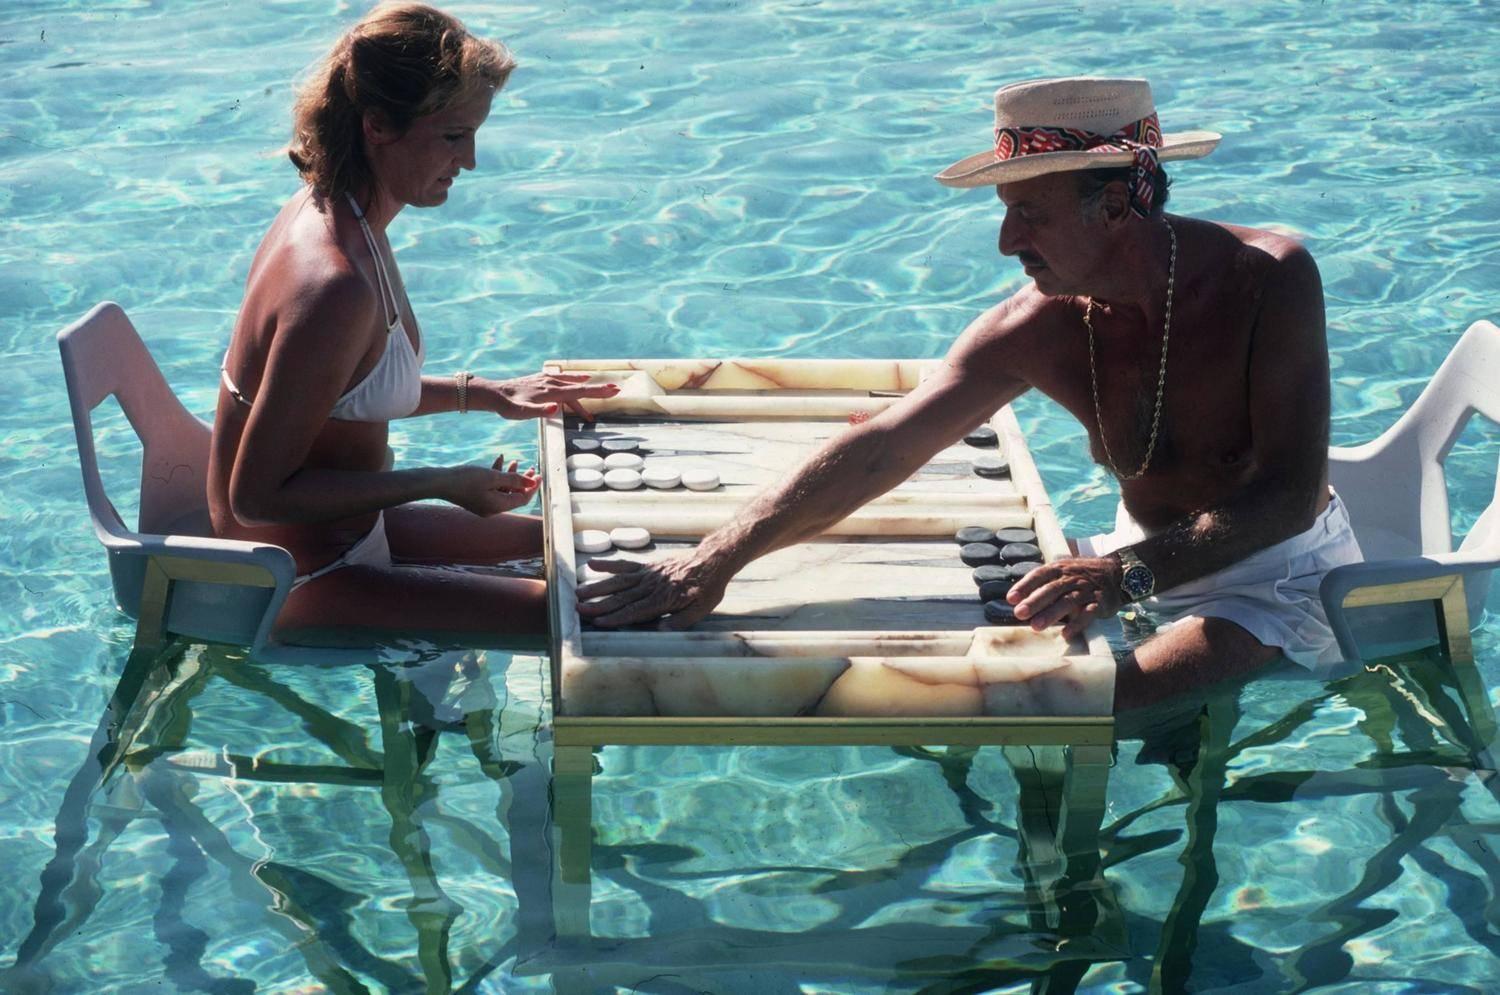 Slim Aarons Portrait Photograph - Keep Your Cool (Backgammon in Acapulco), Estate Edition